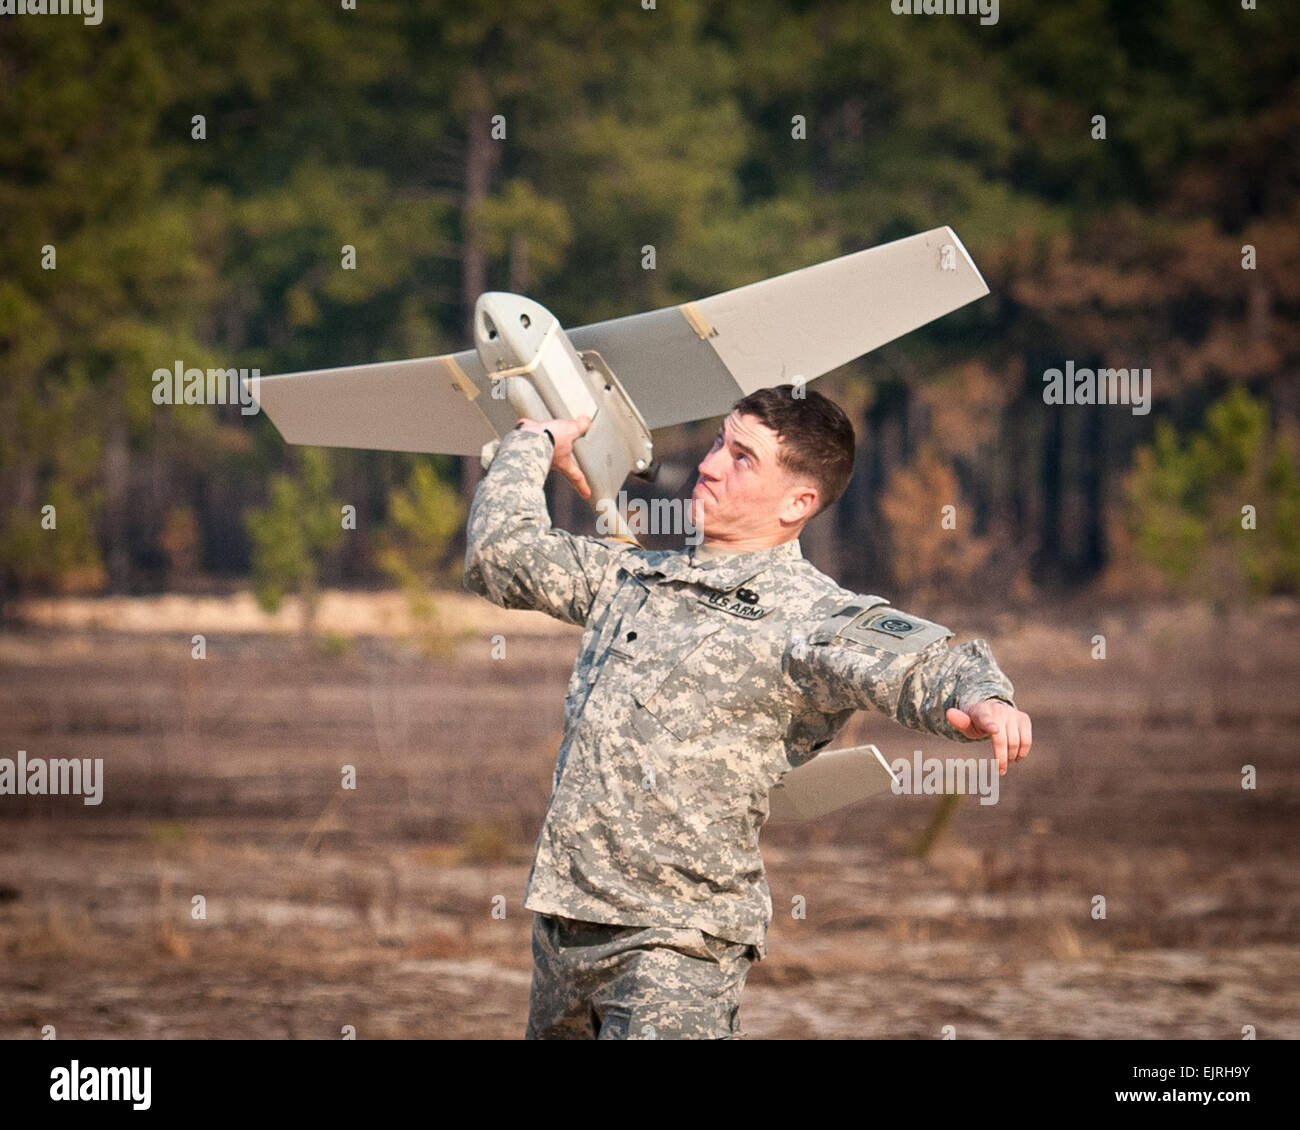 Spc. Corey Deer, a unmanned aerial vehicle operator with 1st Battalion, 504th Parachute Infantry Regiment, launches a Raven during a UAV refresher course Feb. 5, 2013, at Fort Bragg, N.C.  His battalion is part of the 82nd Airborne Division’s 1st Brigade Combat Team.  Sgt. Michael J. MacLeod Stock Photo